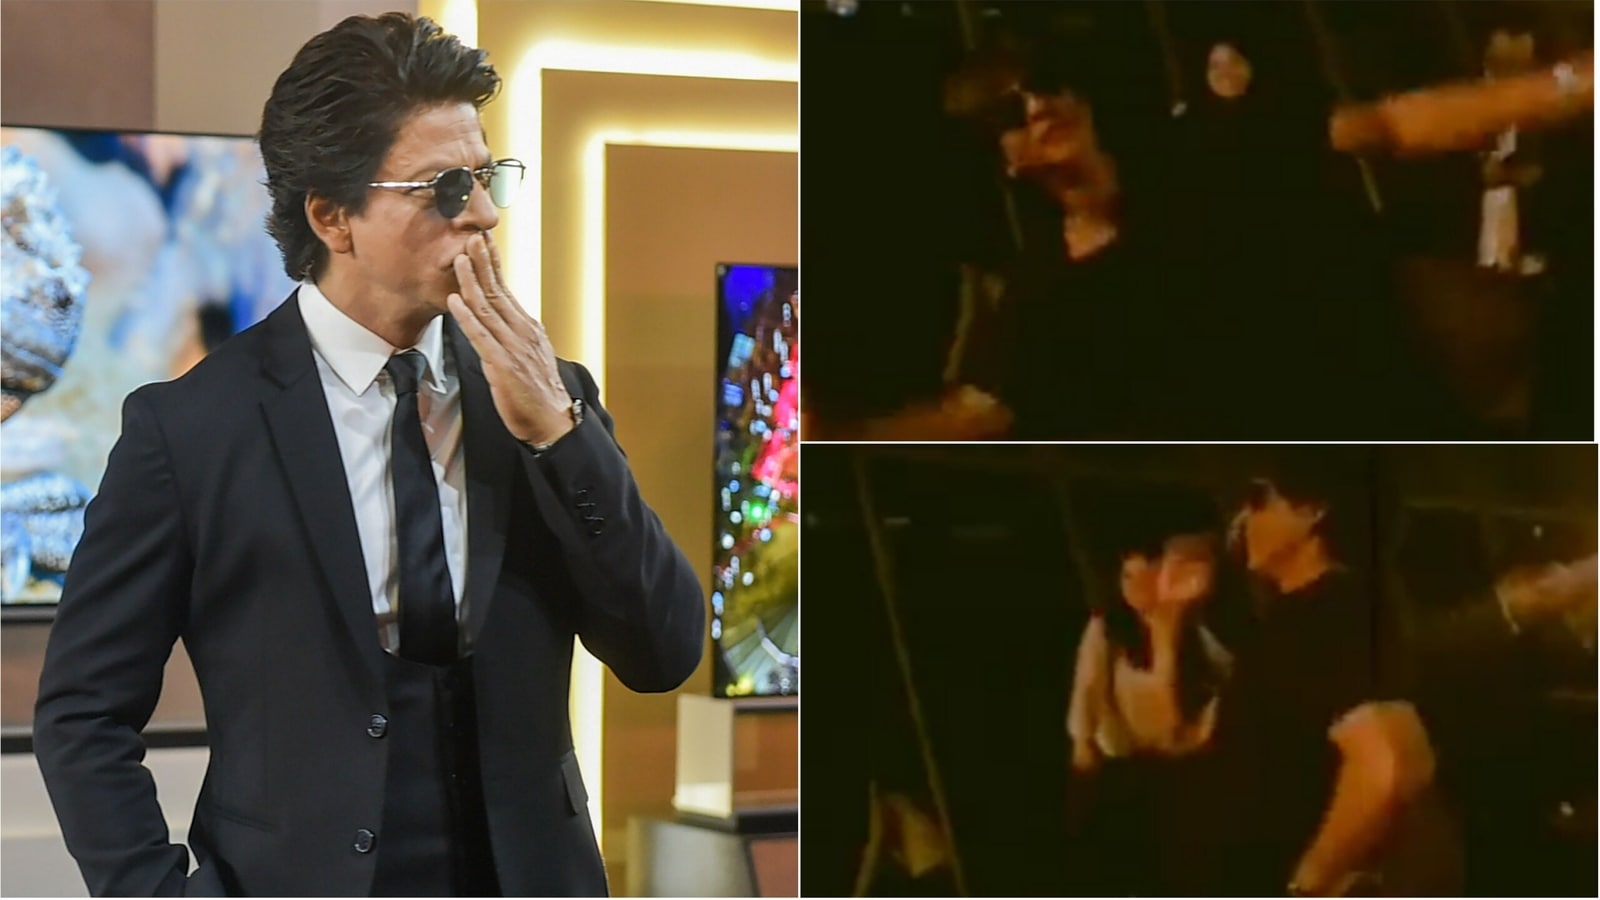 Shah Rukh Khan dances his heart out to Na Ja in unseen video. Watch |  Bollywood - Hindustan Times